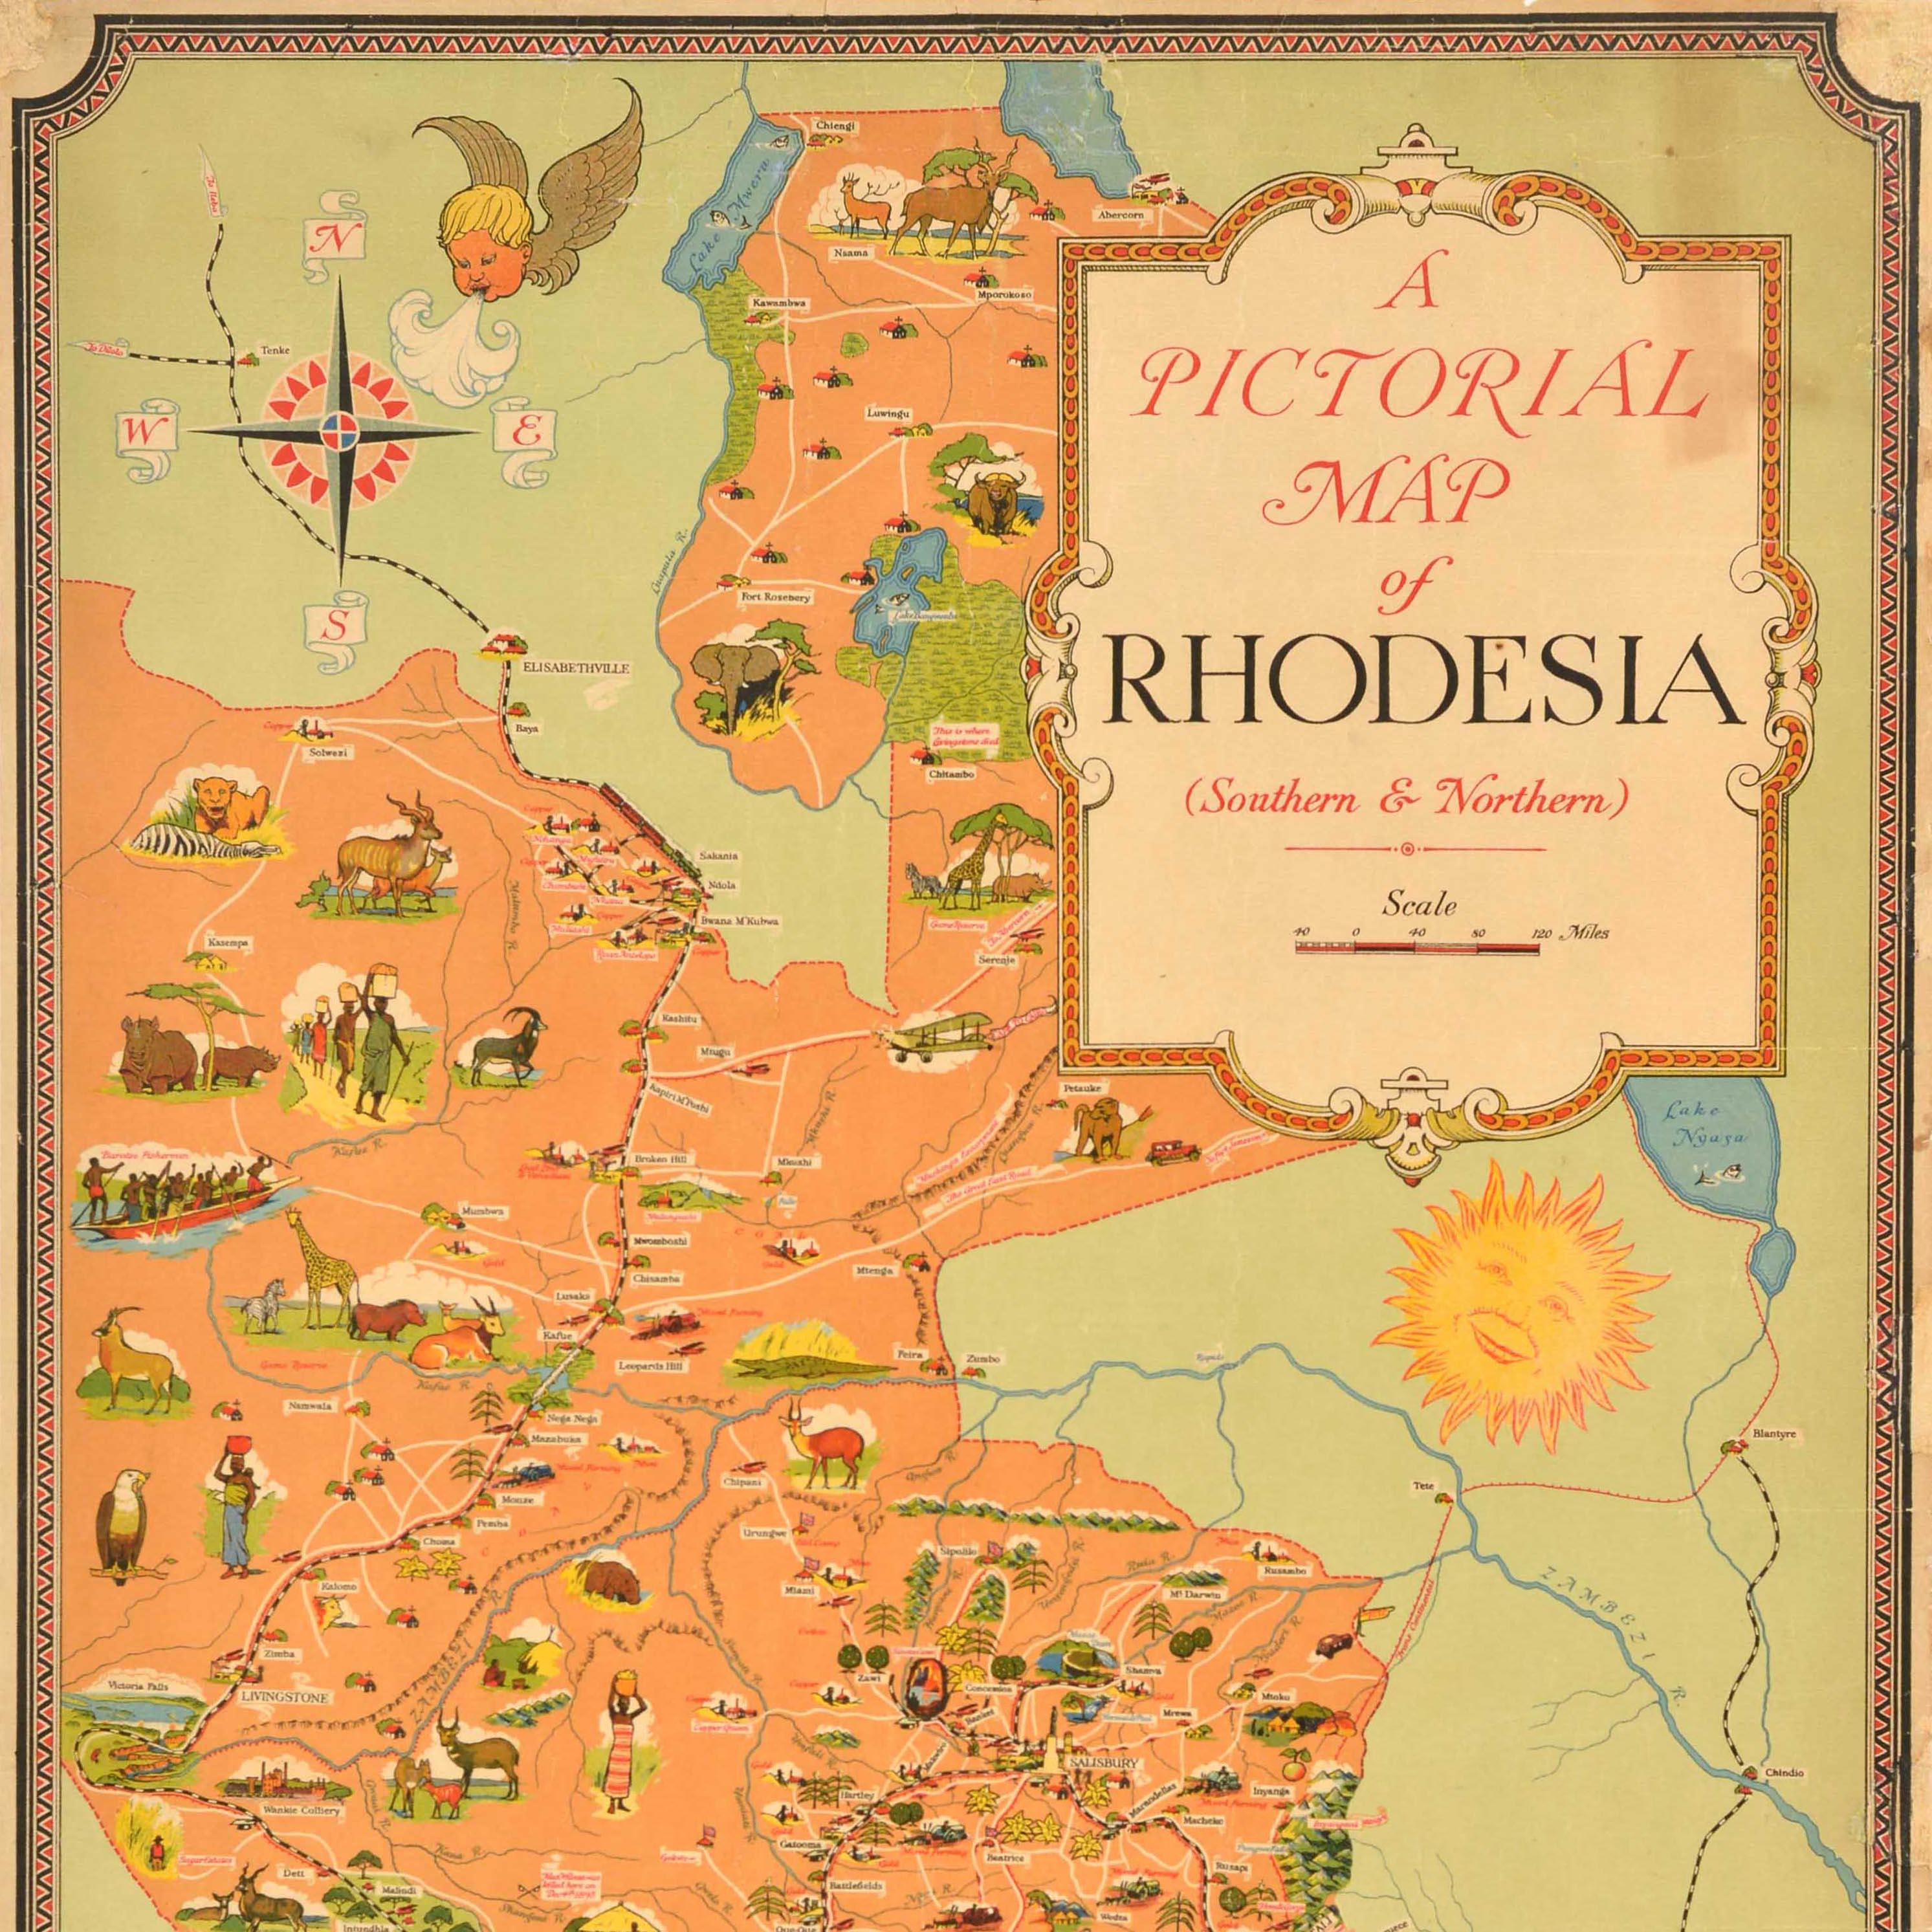 Original Vintage Travel Poster Rhodesia Pictorial Map Southern Africa Zimbabwe - Print by Unknown